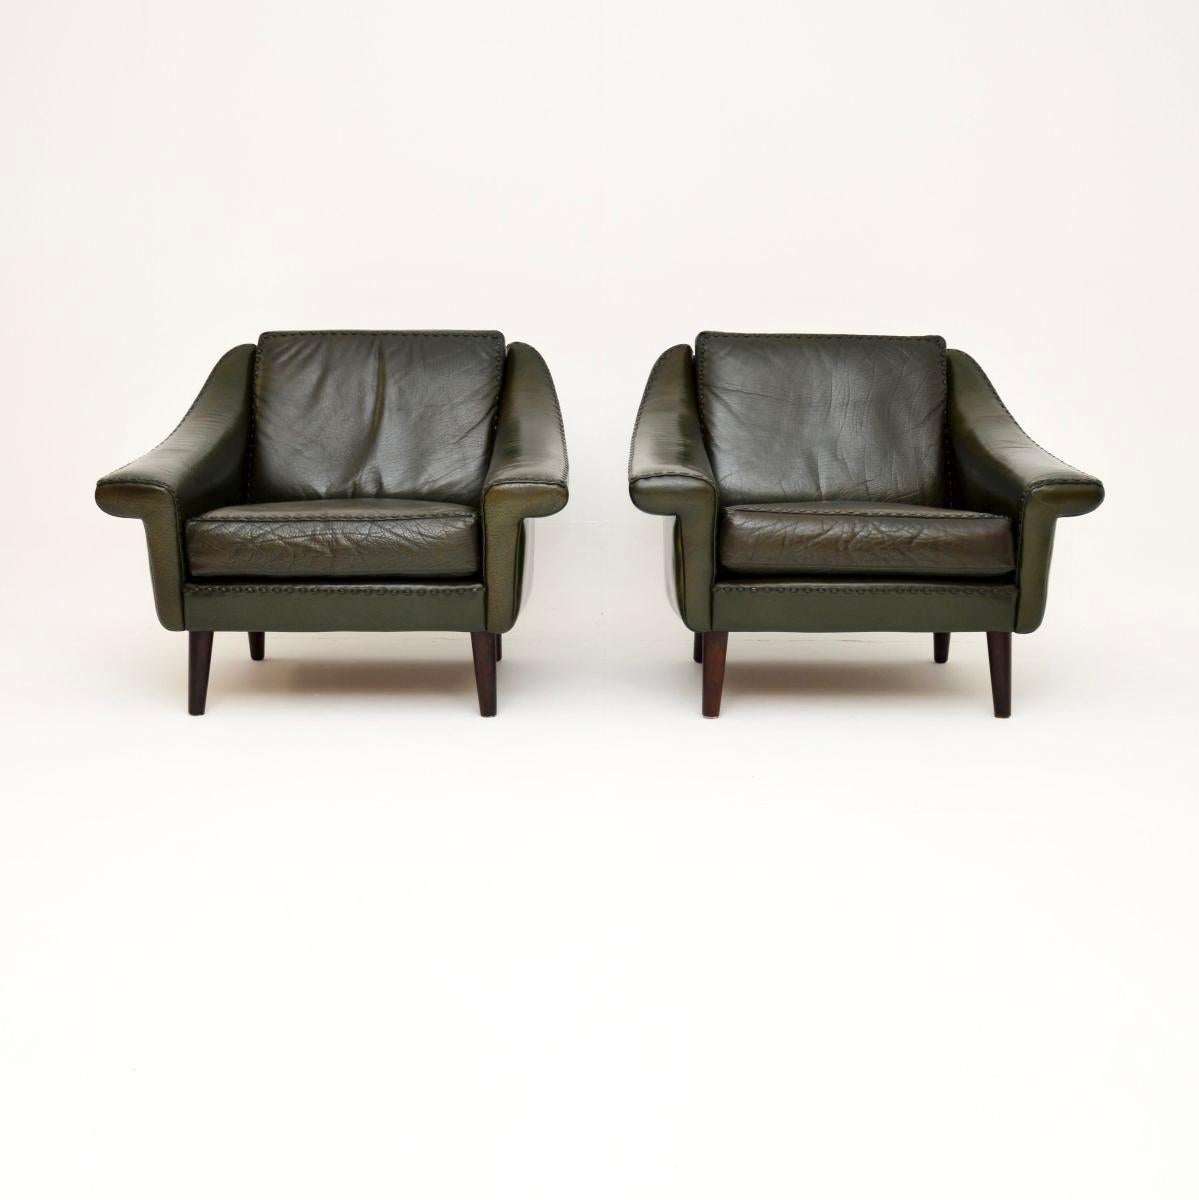 Mid-Century Modern Pair of Danish Vintage Leather Matador Armchairs by Aage Christiansen For Sale